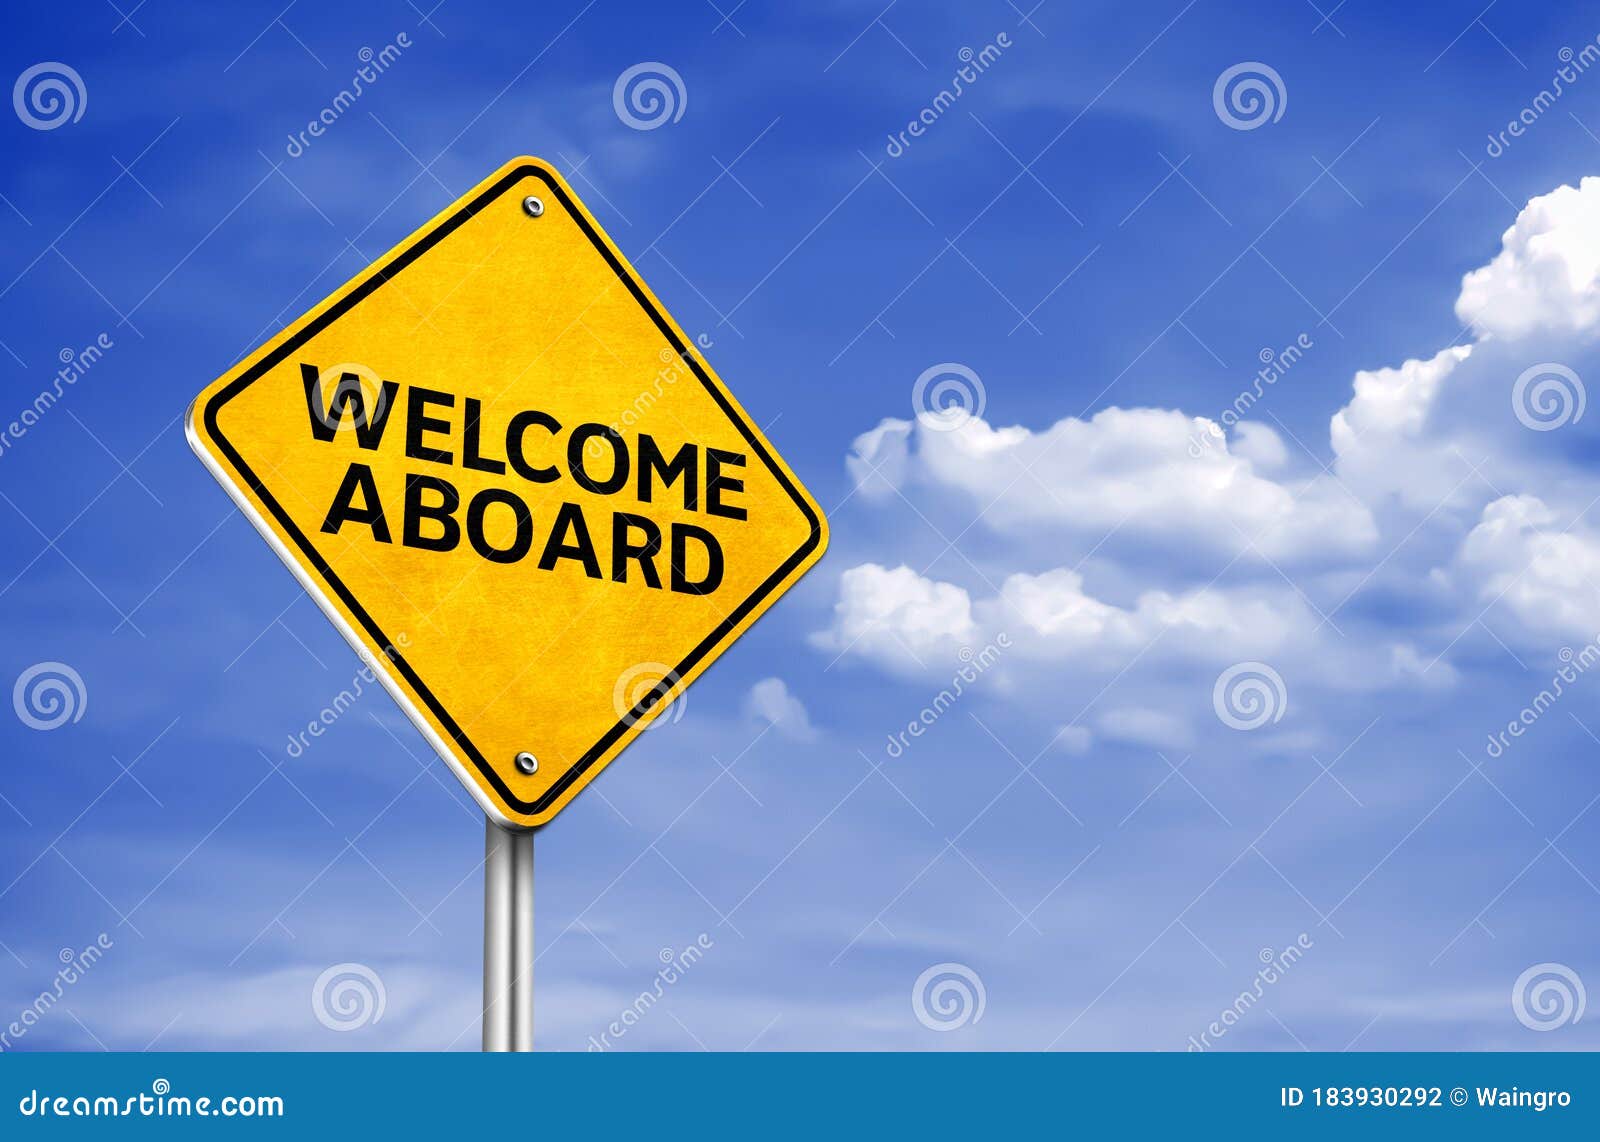 welcome aboard - greetings for a new start